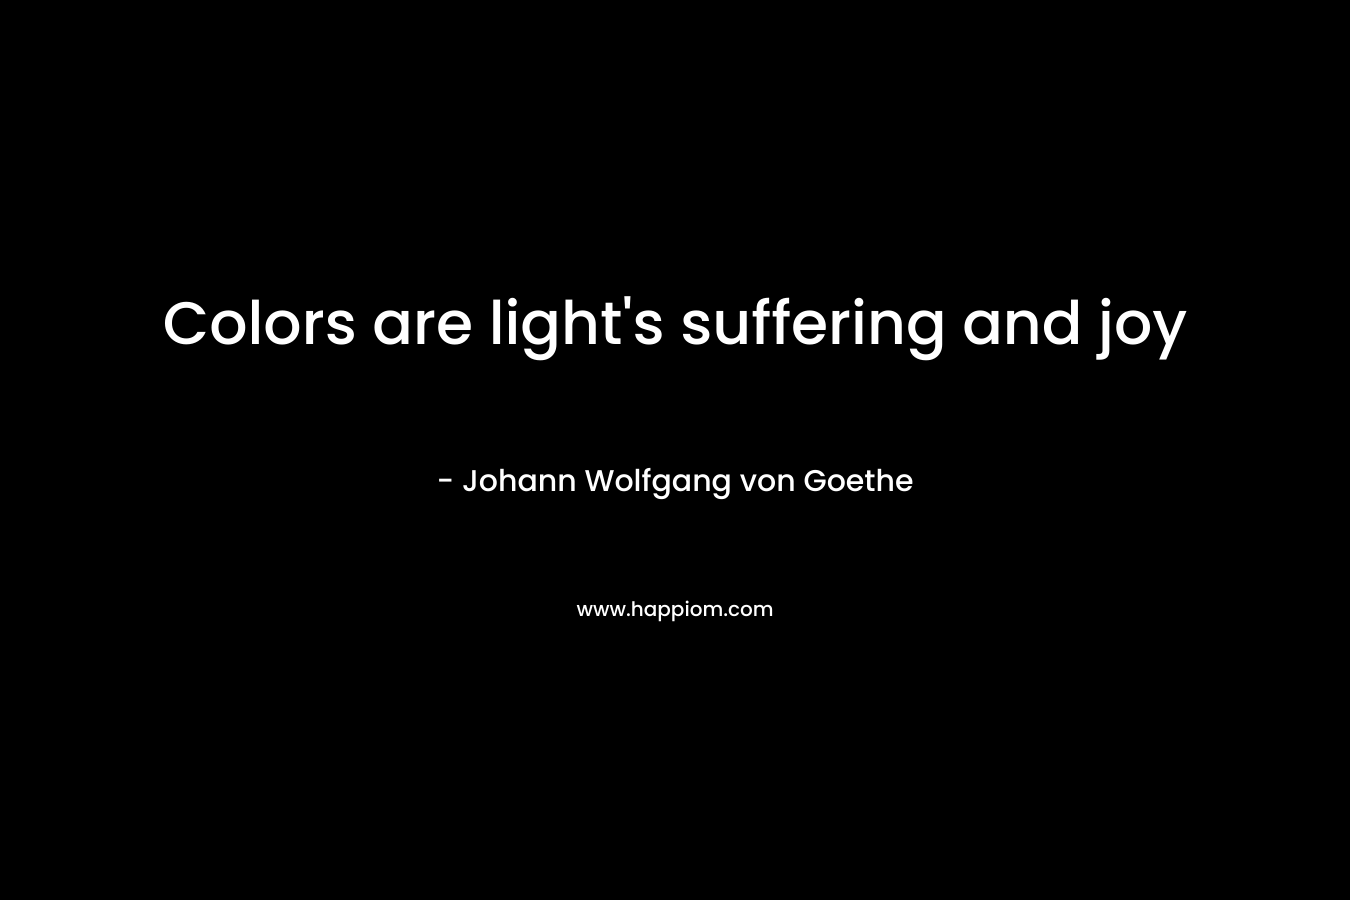 Colors are light's suffering and joy